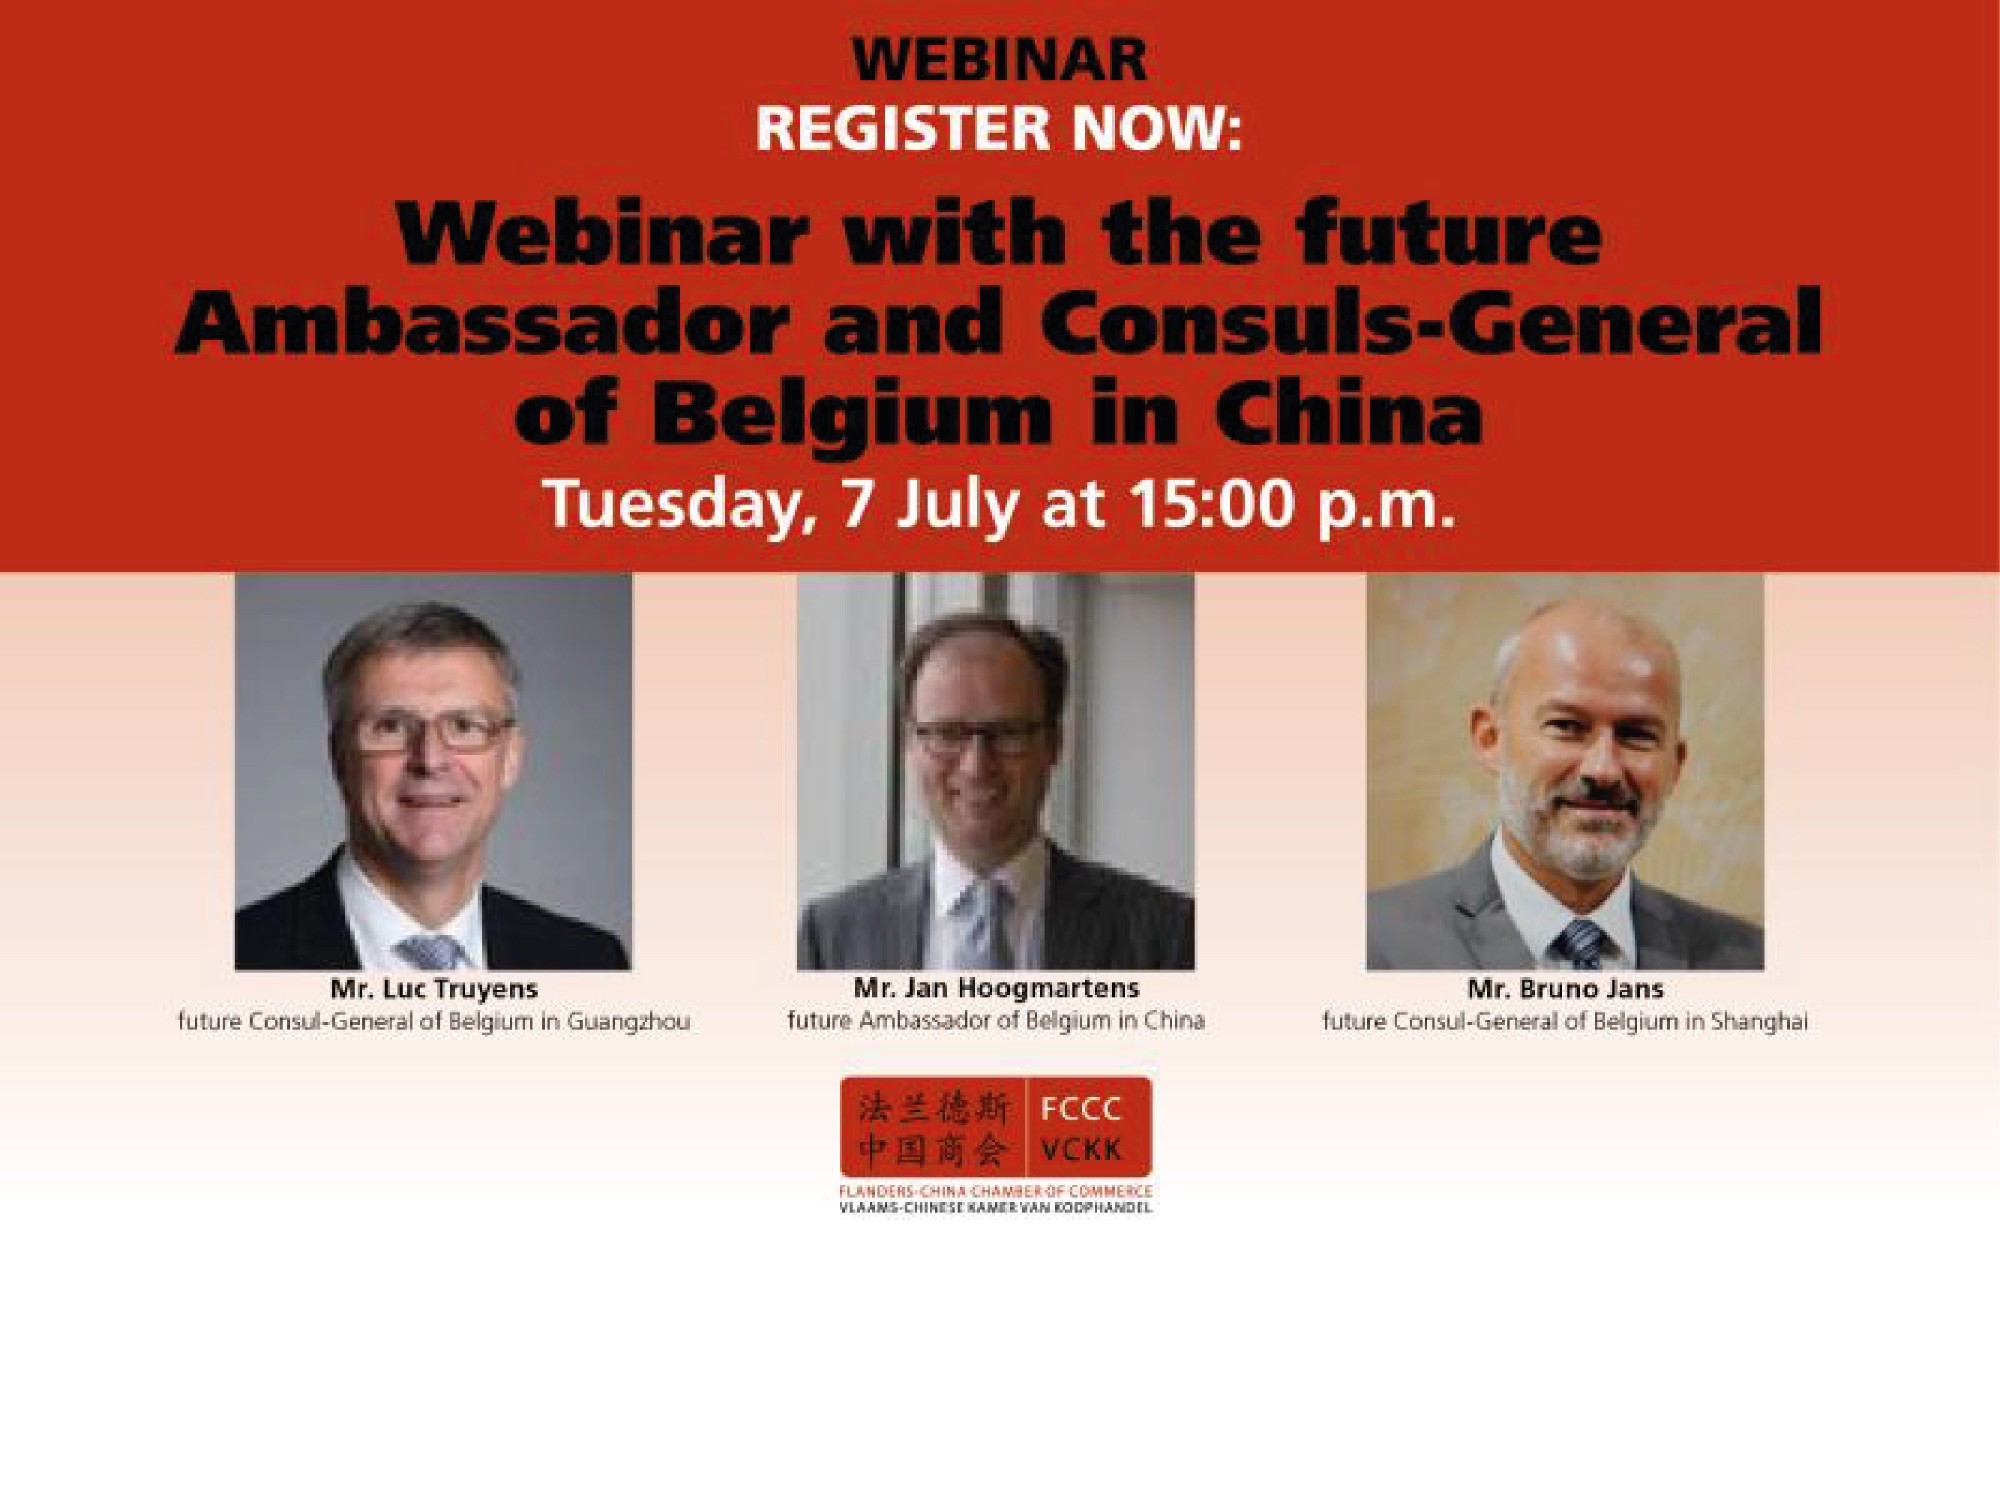 Webinar with the future Ambassador in China and the Consuls-General of Belgium in Shanghai and Guangzhou